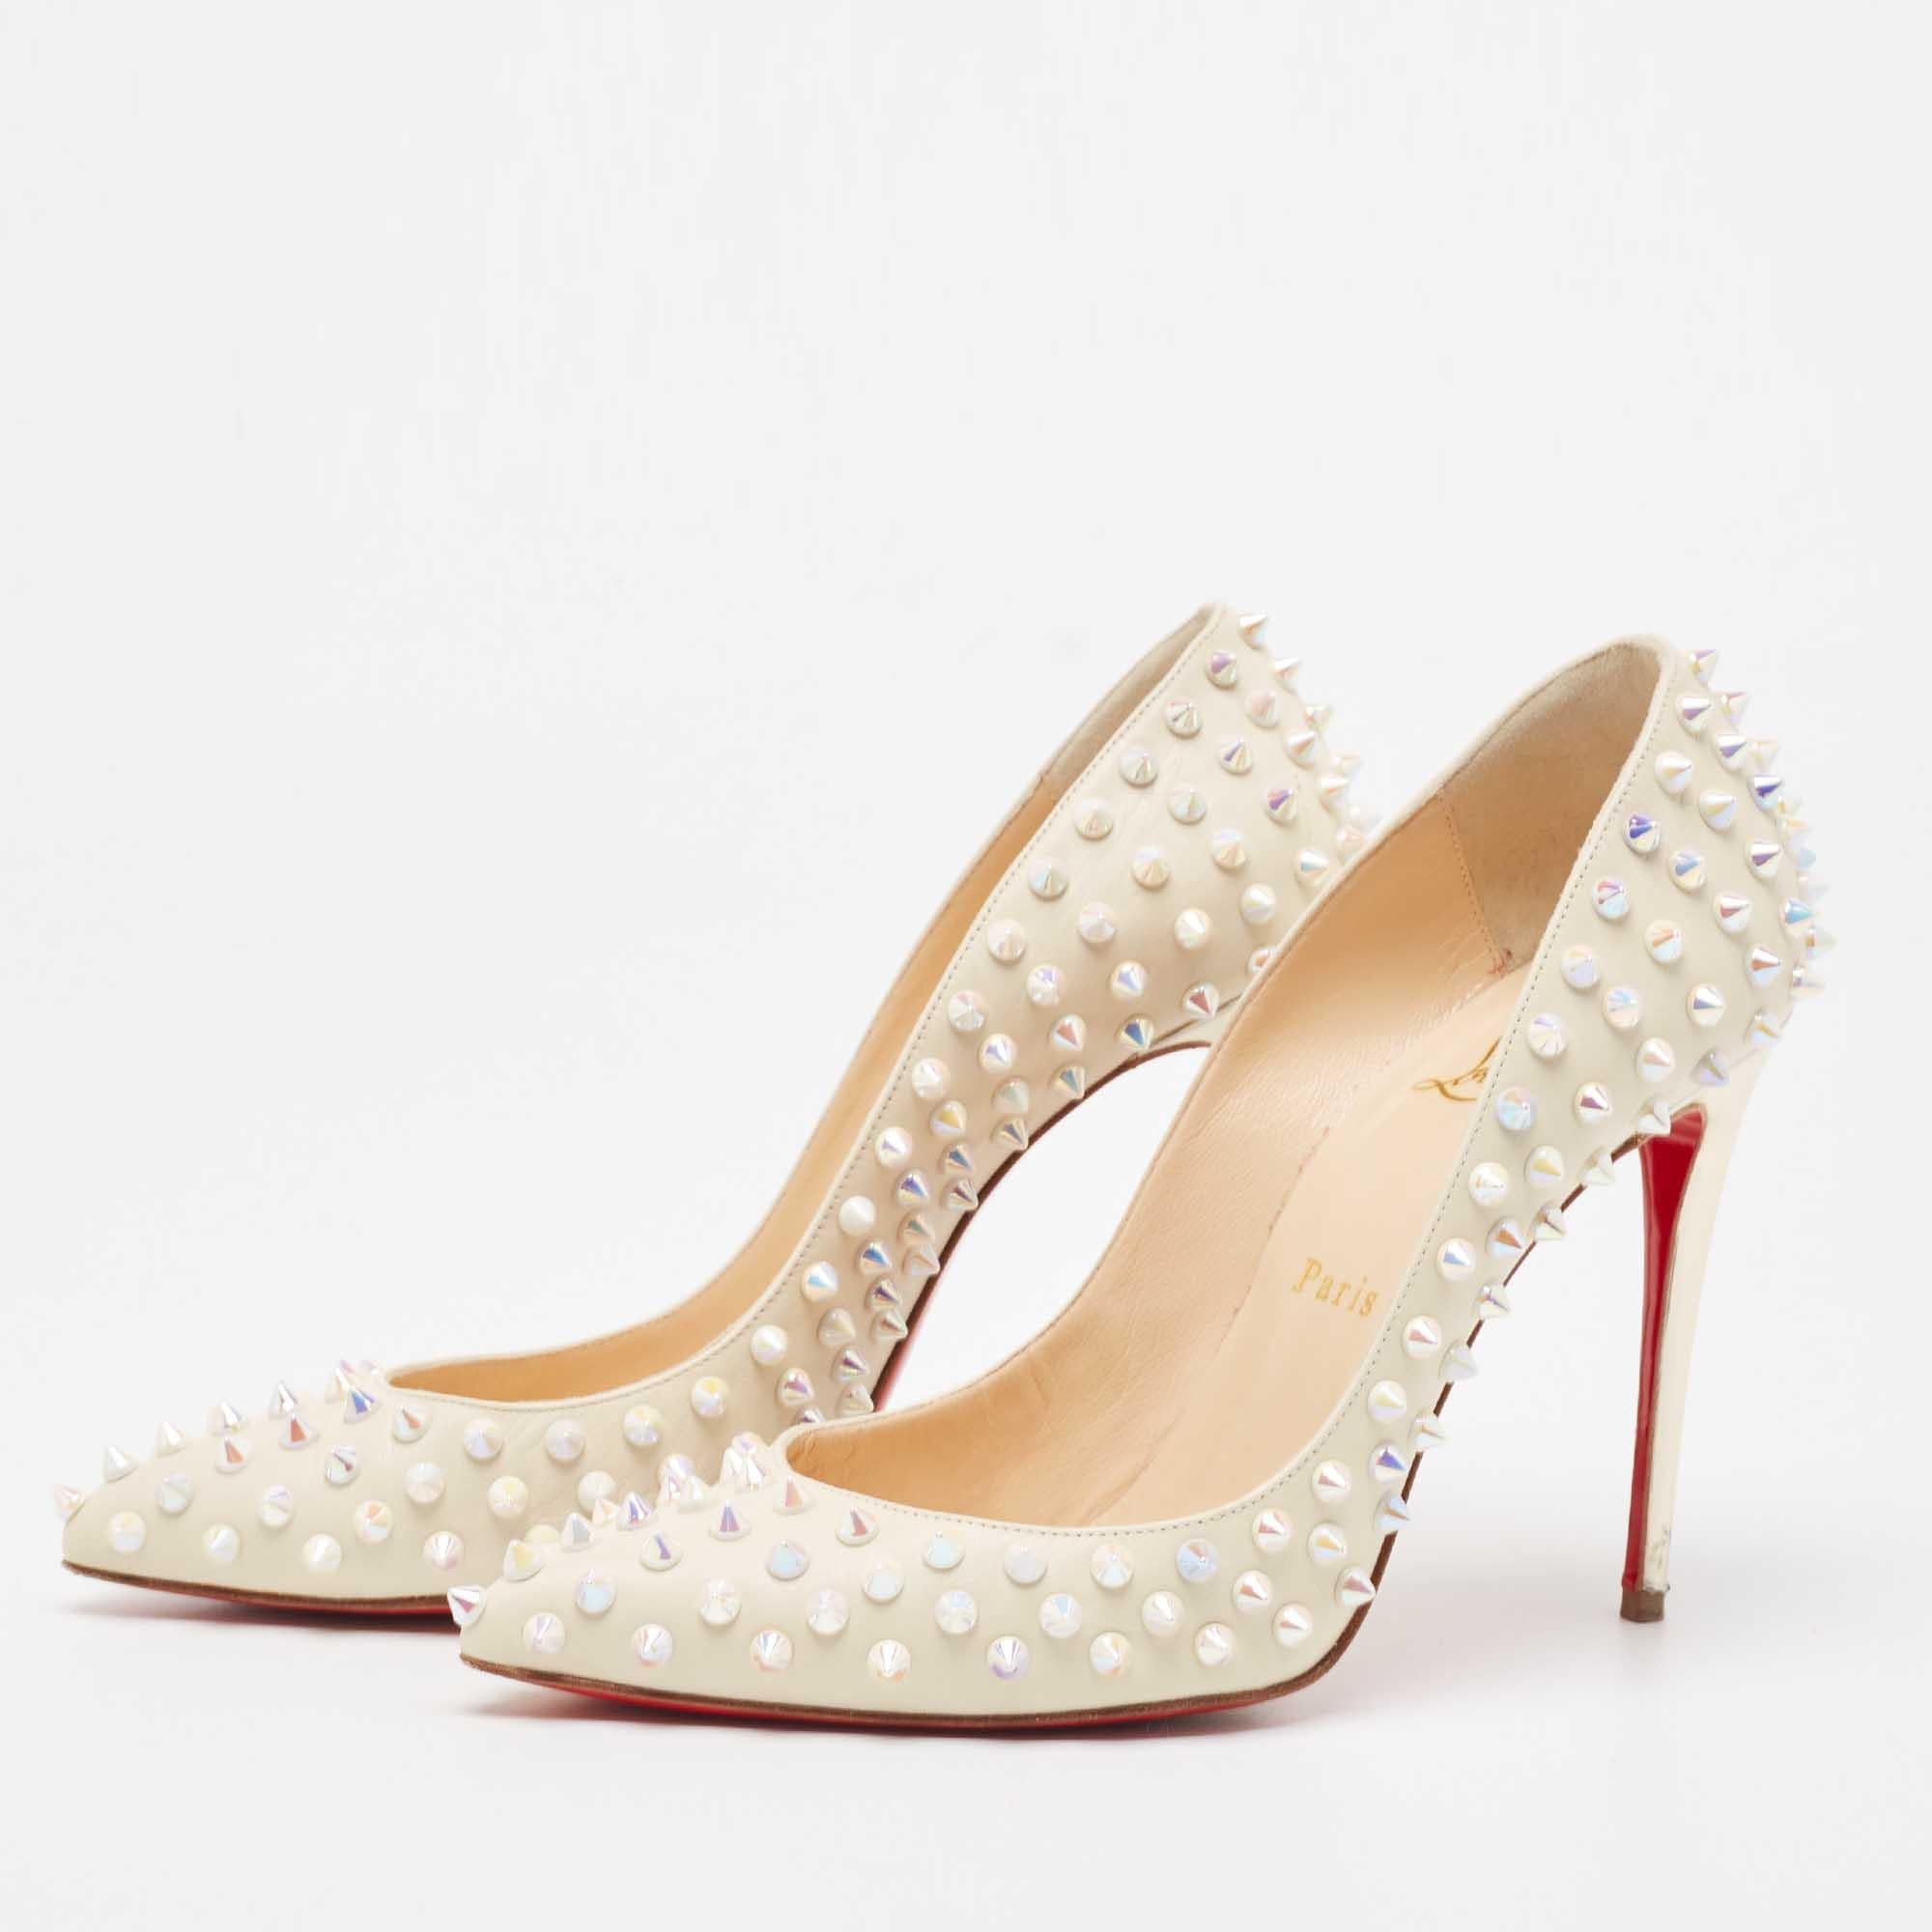 Christian Louboutin Cream Leather Follies Spikes Pointed Toe Pumps Size 38 For Sale 4